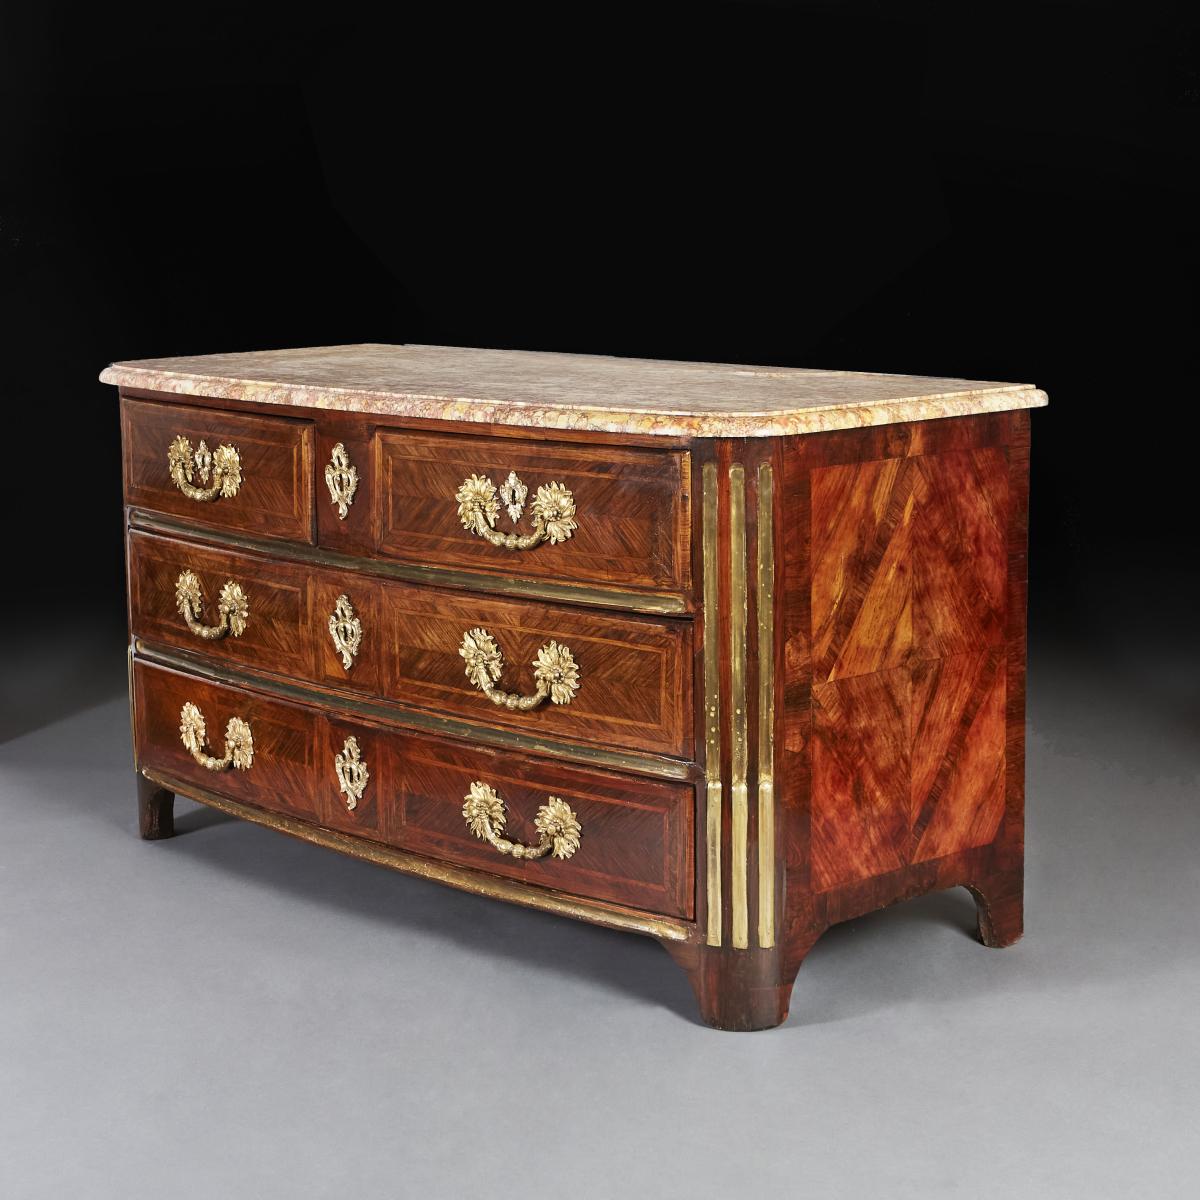 18th Century Marquetry Commode Stamped by Louis-Simon Painsun